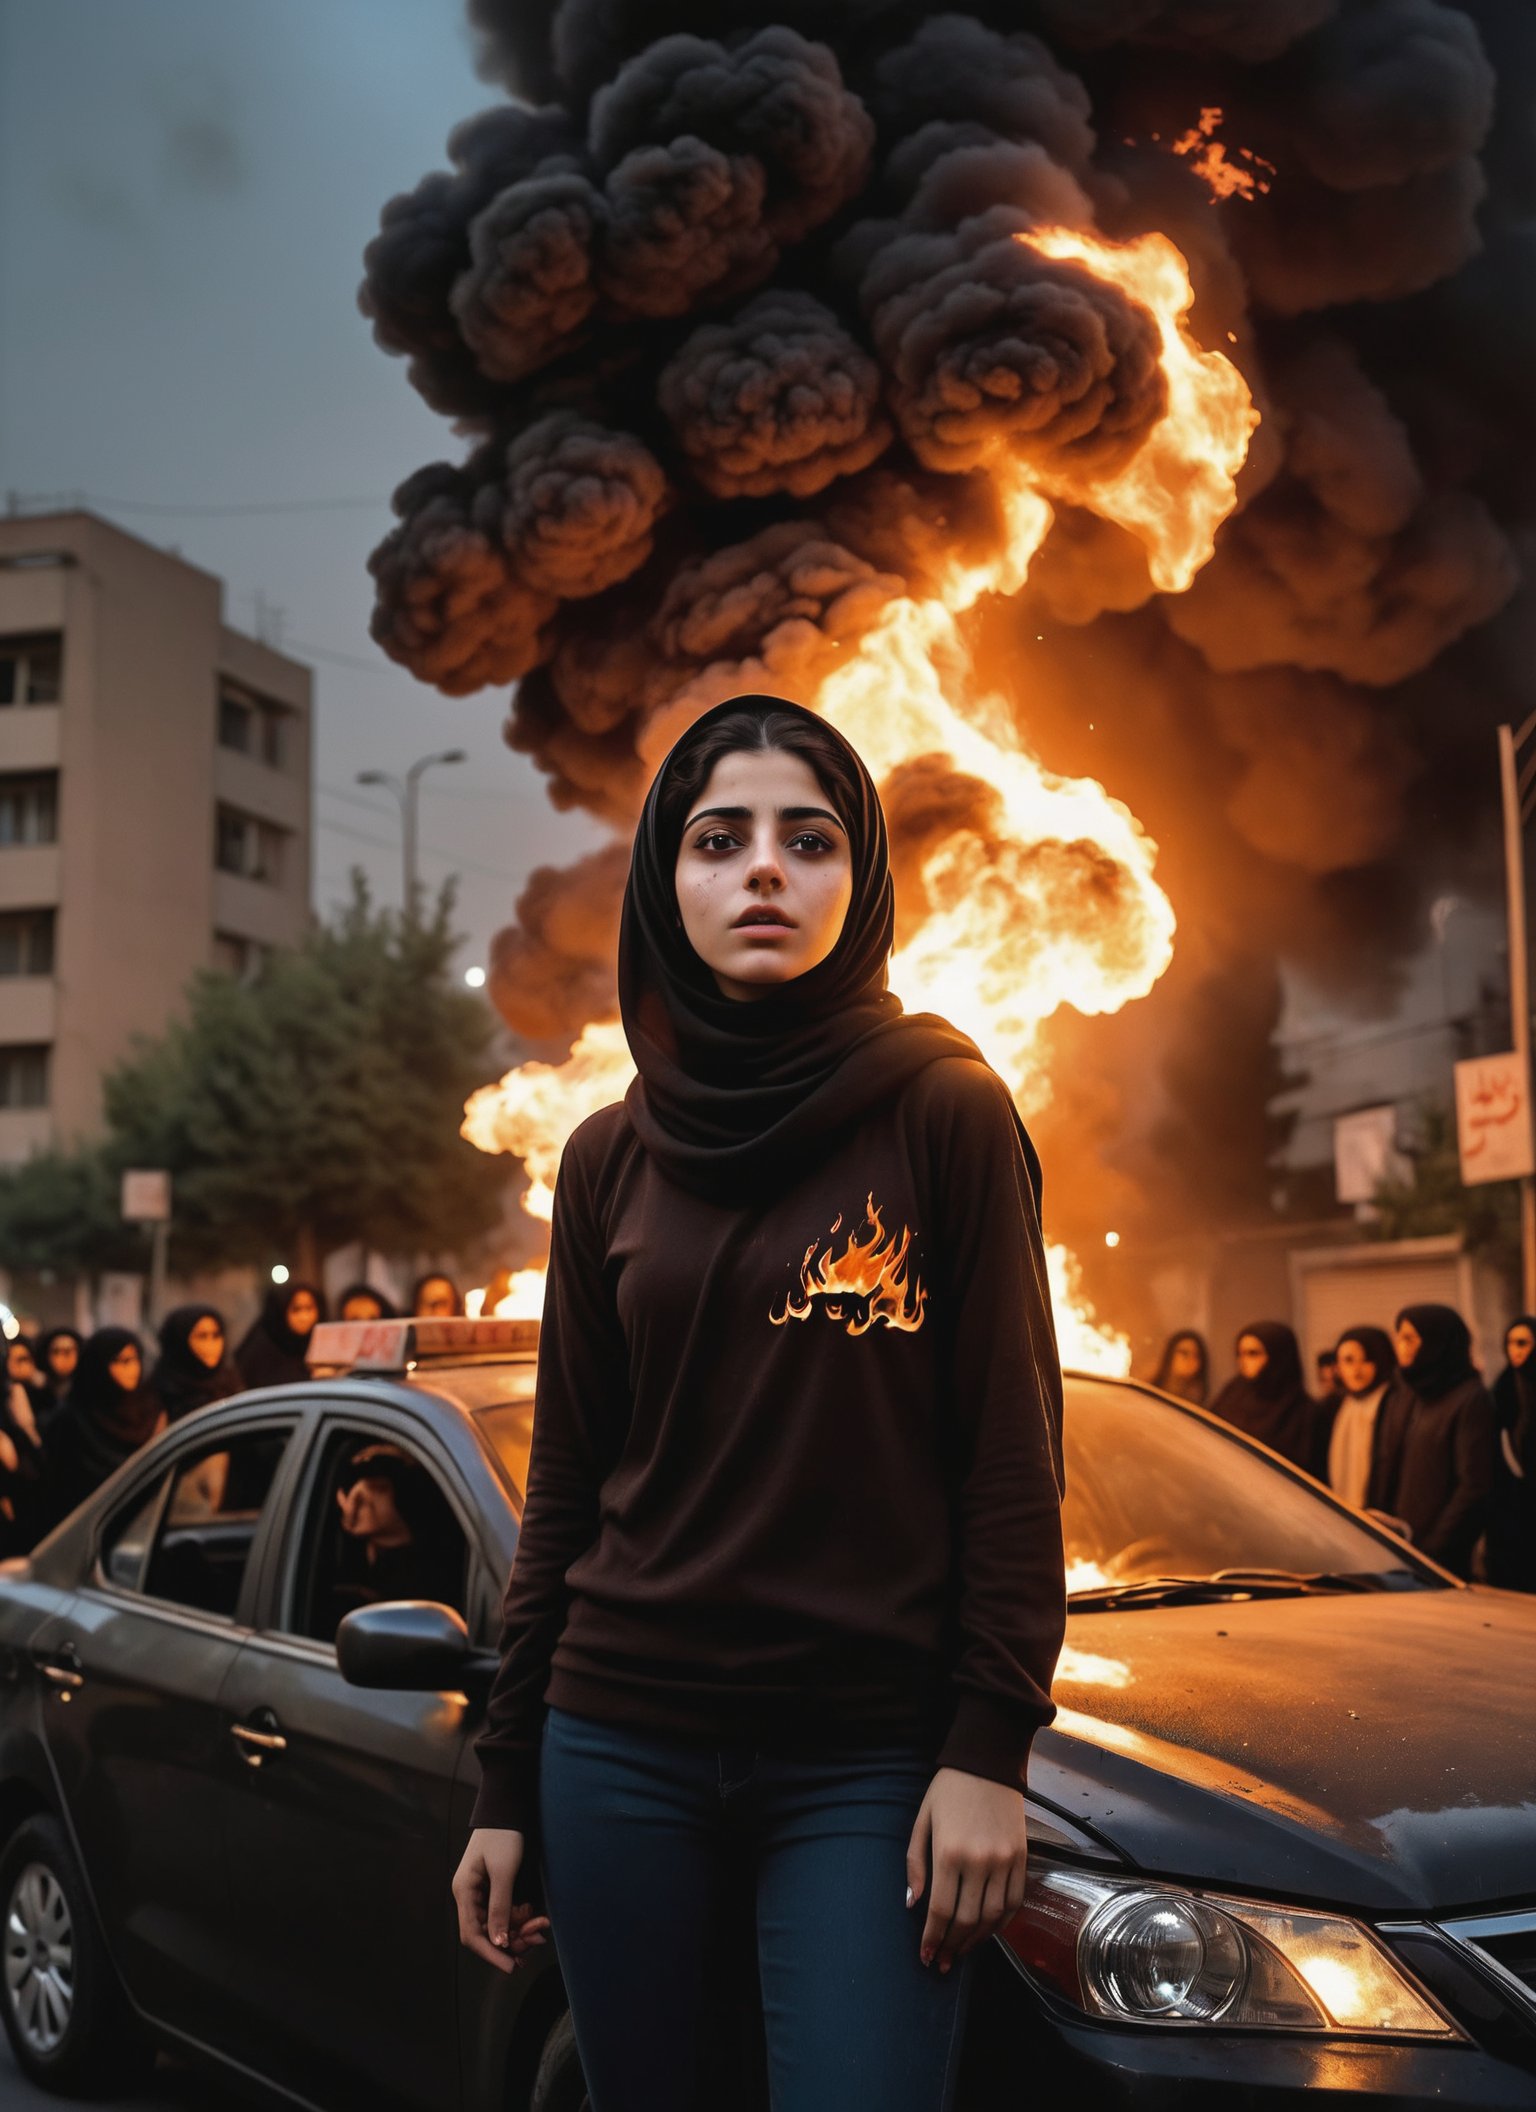 dark aesthetic photo, an Iranian girl amidst a chaotic street protest in Tehran, The scene is filled with tension and unrest, as flames from fire flares illuminate the night sky in the background. Standing boldly on the roof of a car.